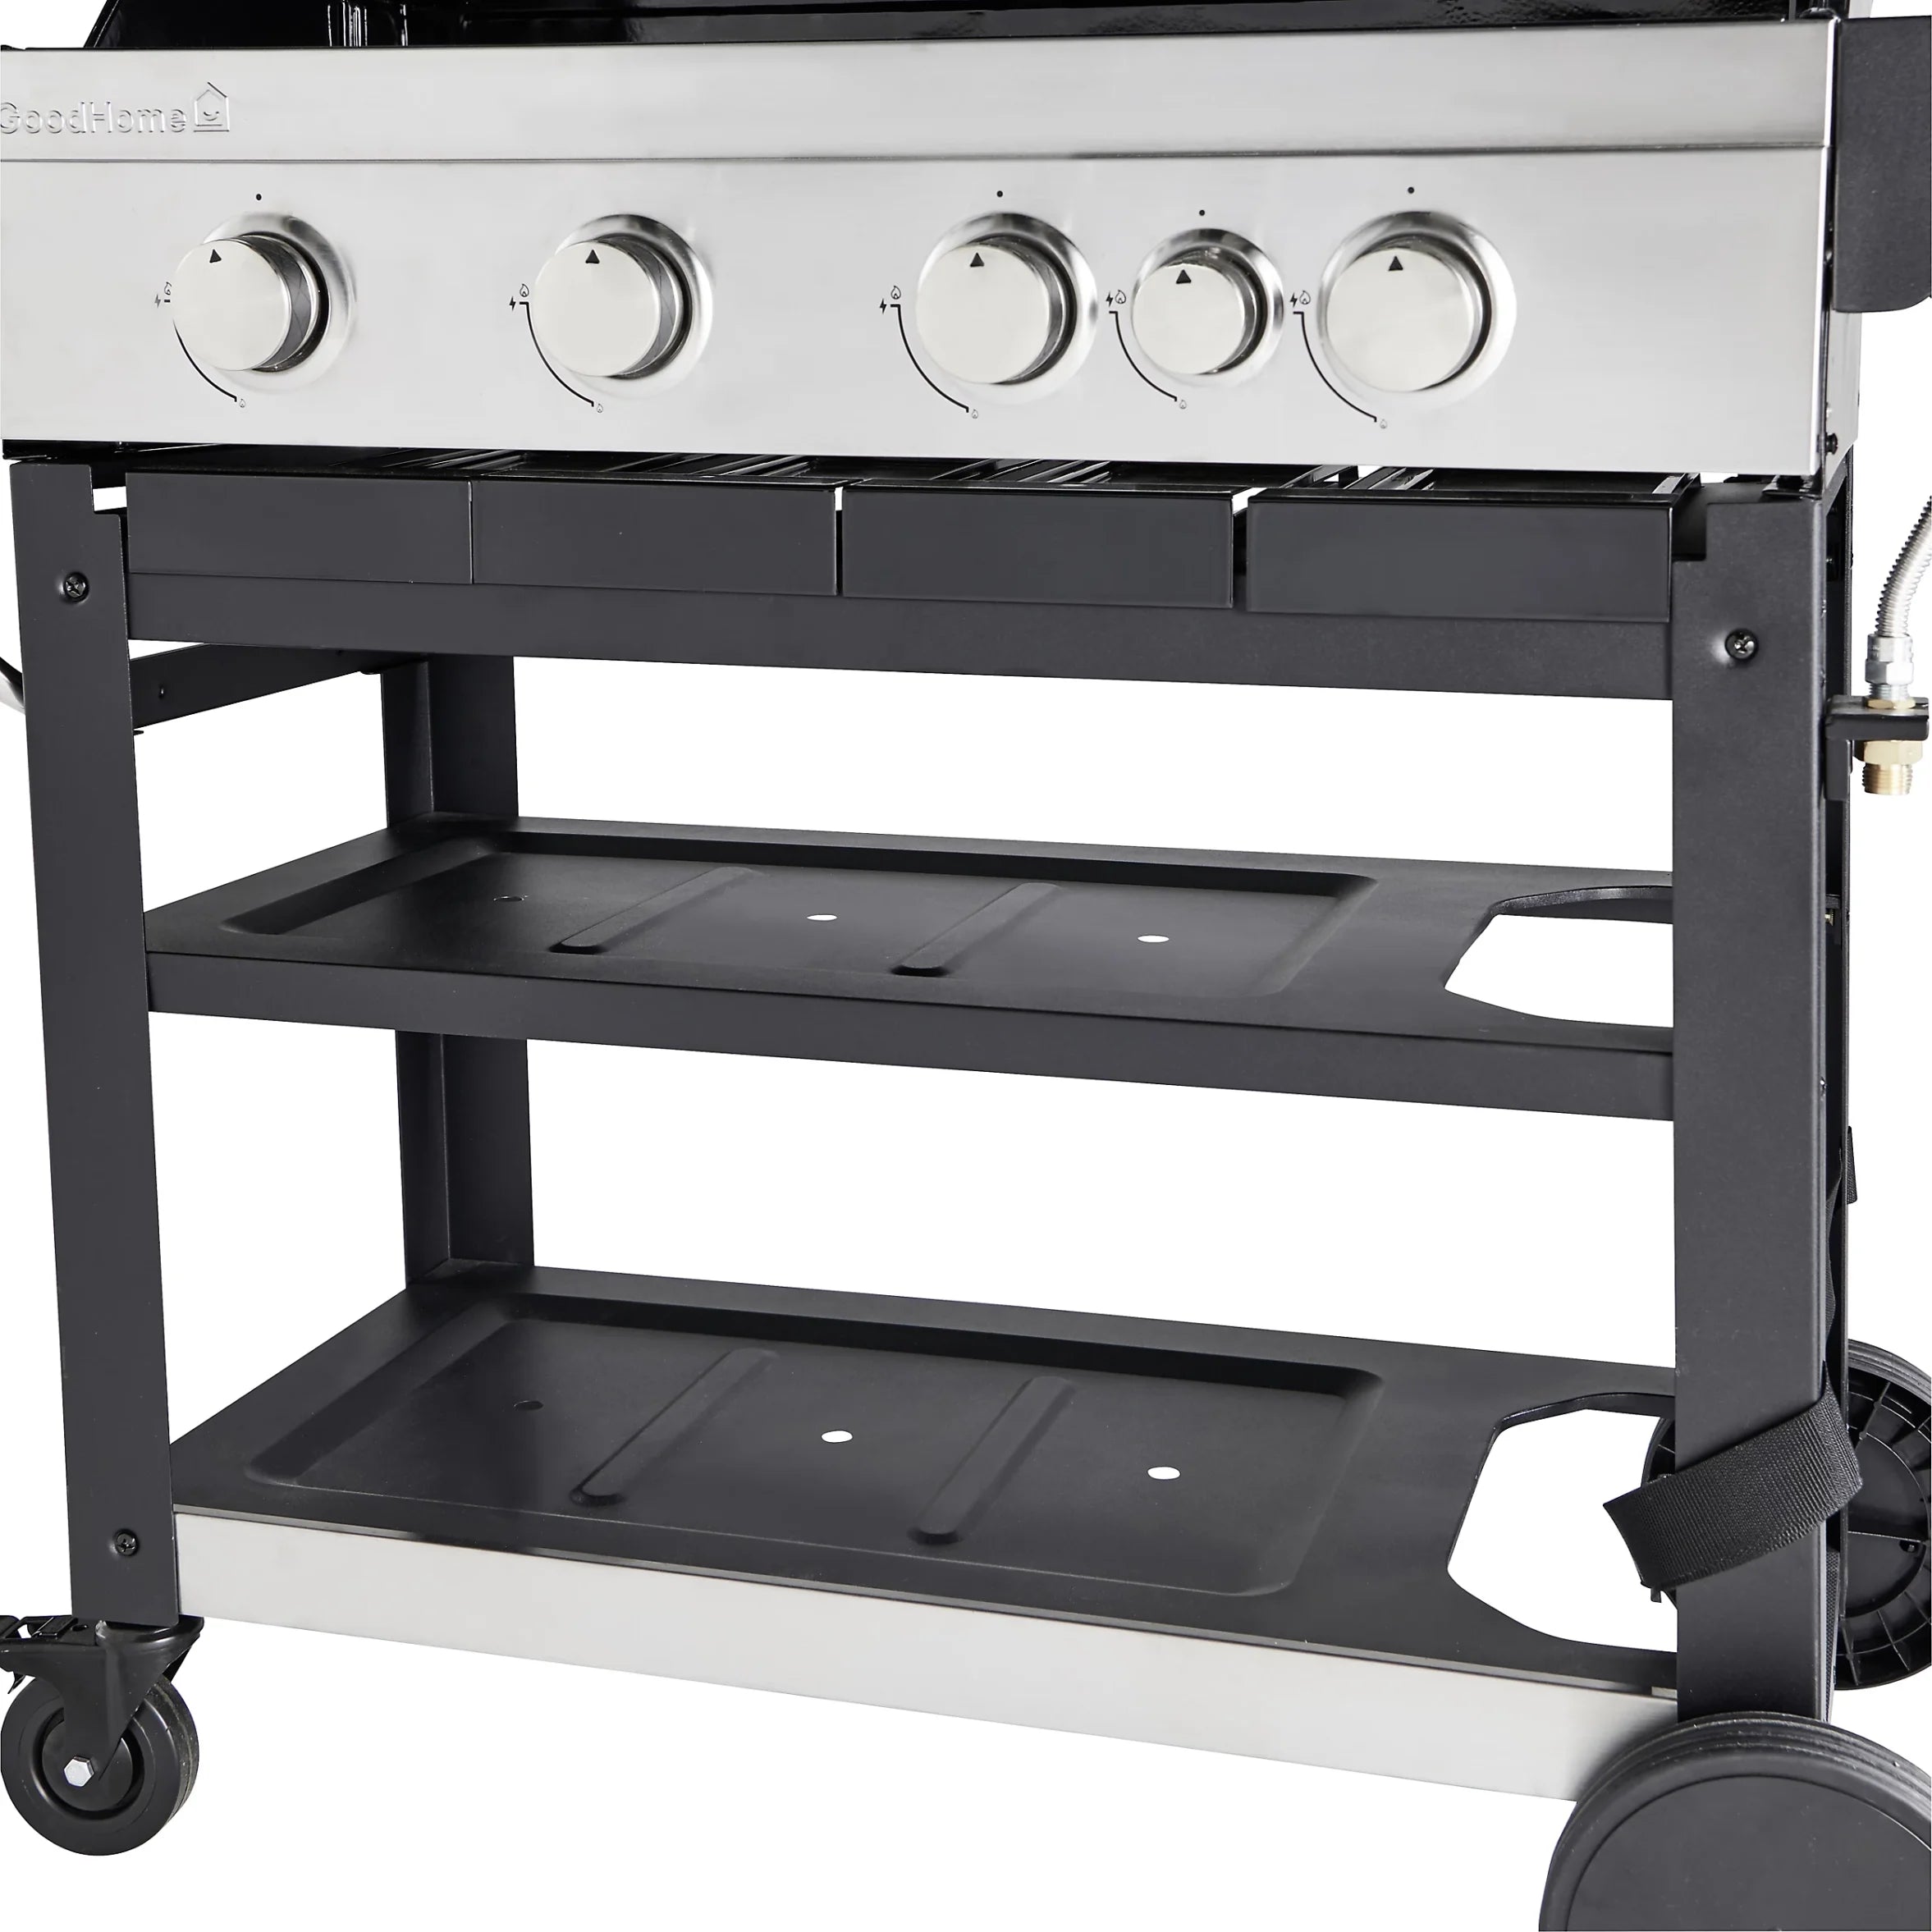 GoodHome Owsley 4.1 Black 4 burner Gas Barbecue +1 Side Burner Outdoor Grill Cosmetic Mark 1010